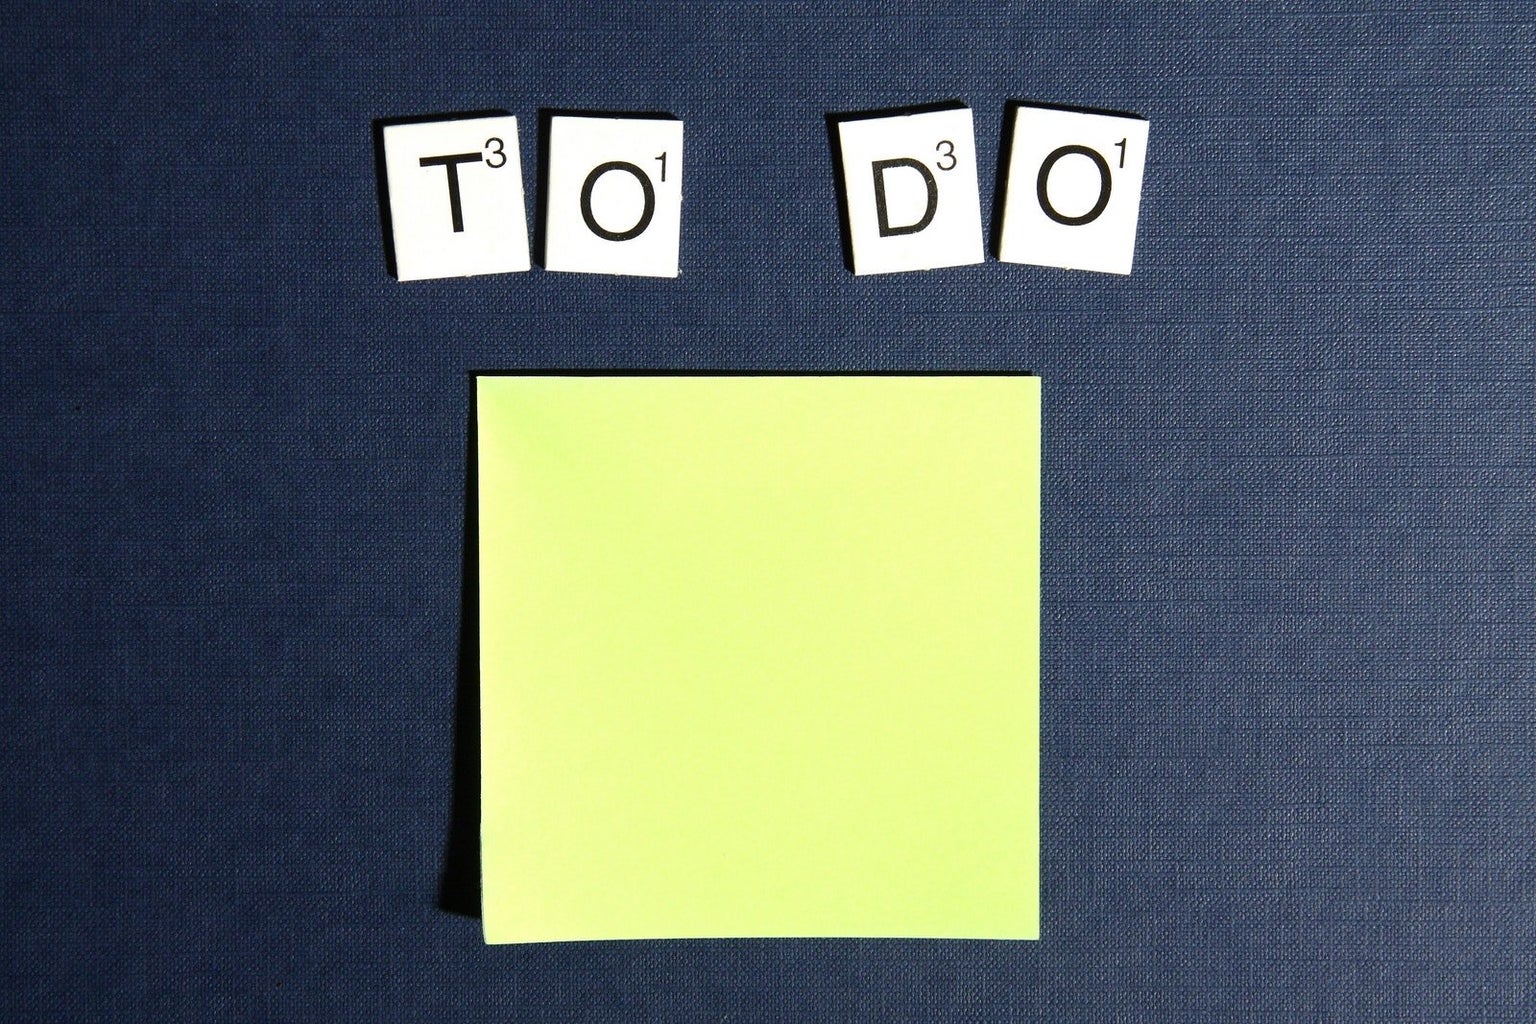 Scrabble tiles spell out \"To Do\" on a blue background above a yellow sticky note